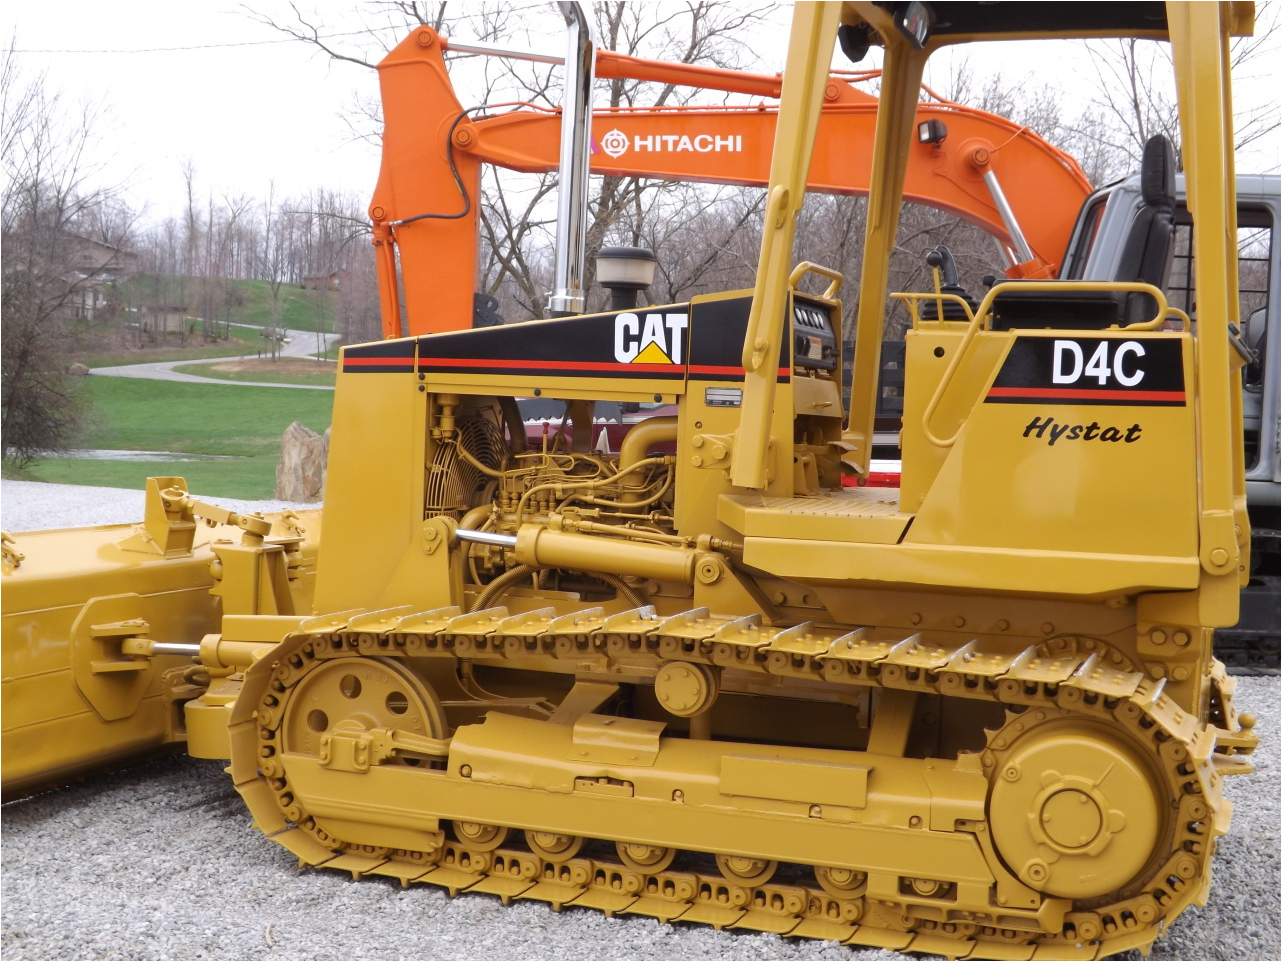 Used D4c iii machines for sale. Find Caterpillar, Cat and more.